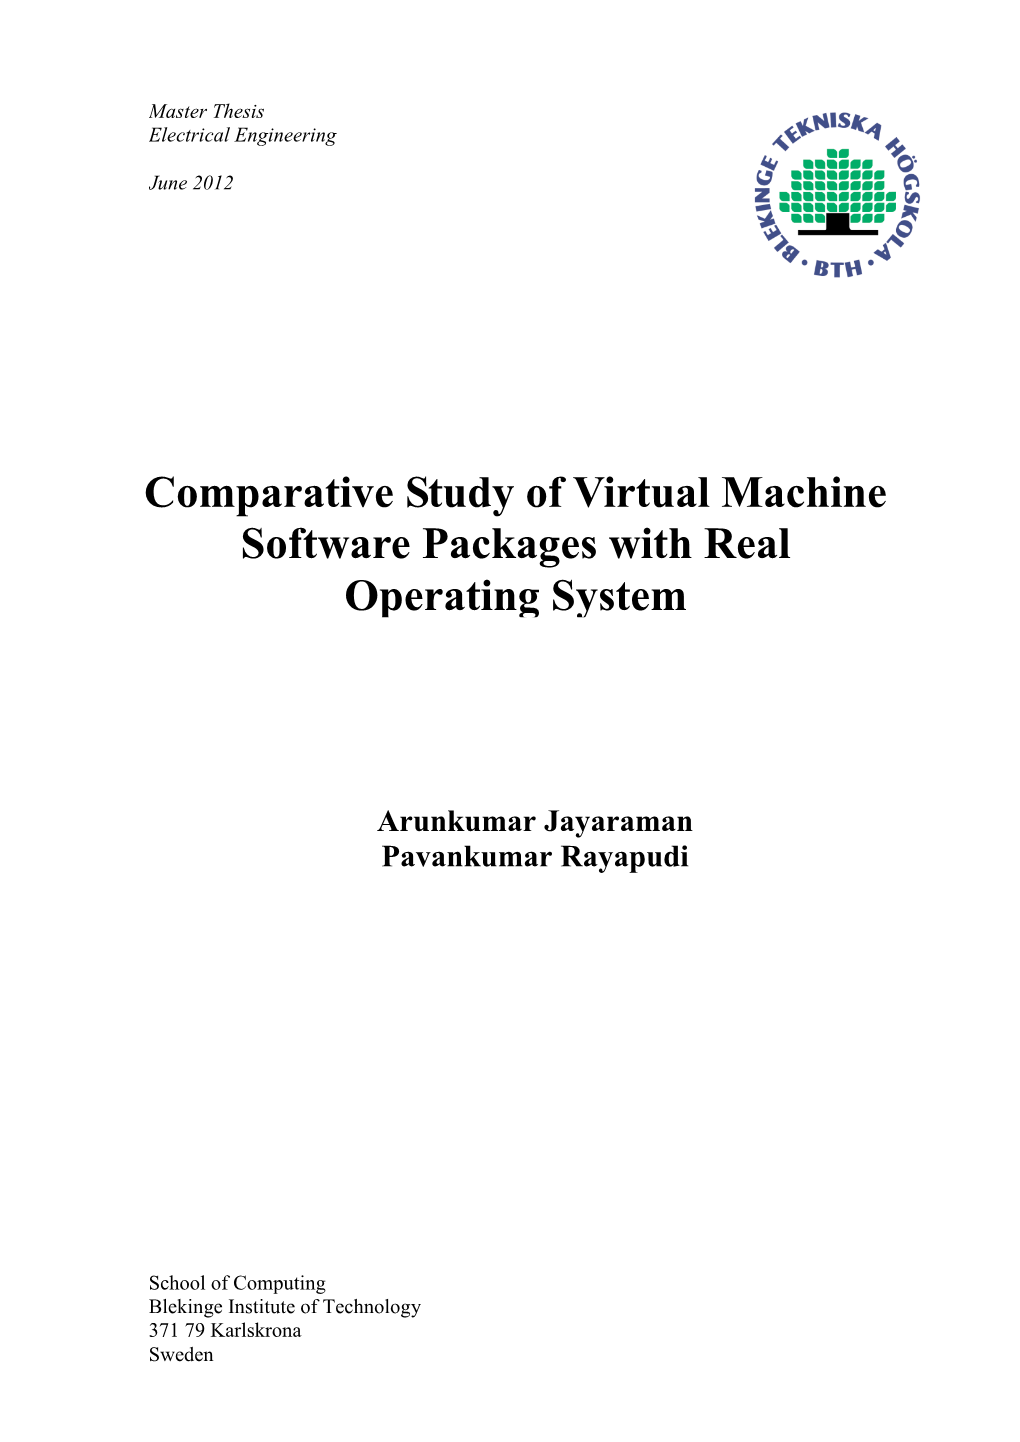 Comparative Study of Virtual Machine Software Packages with Real Operating System